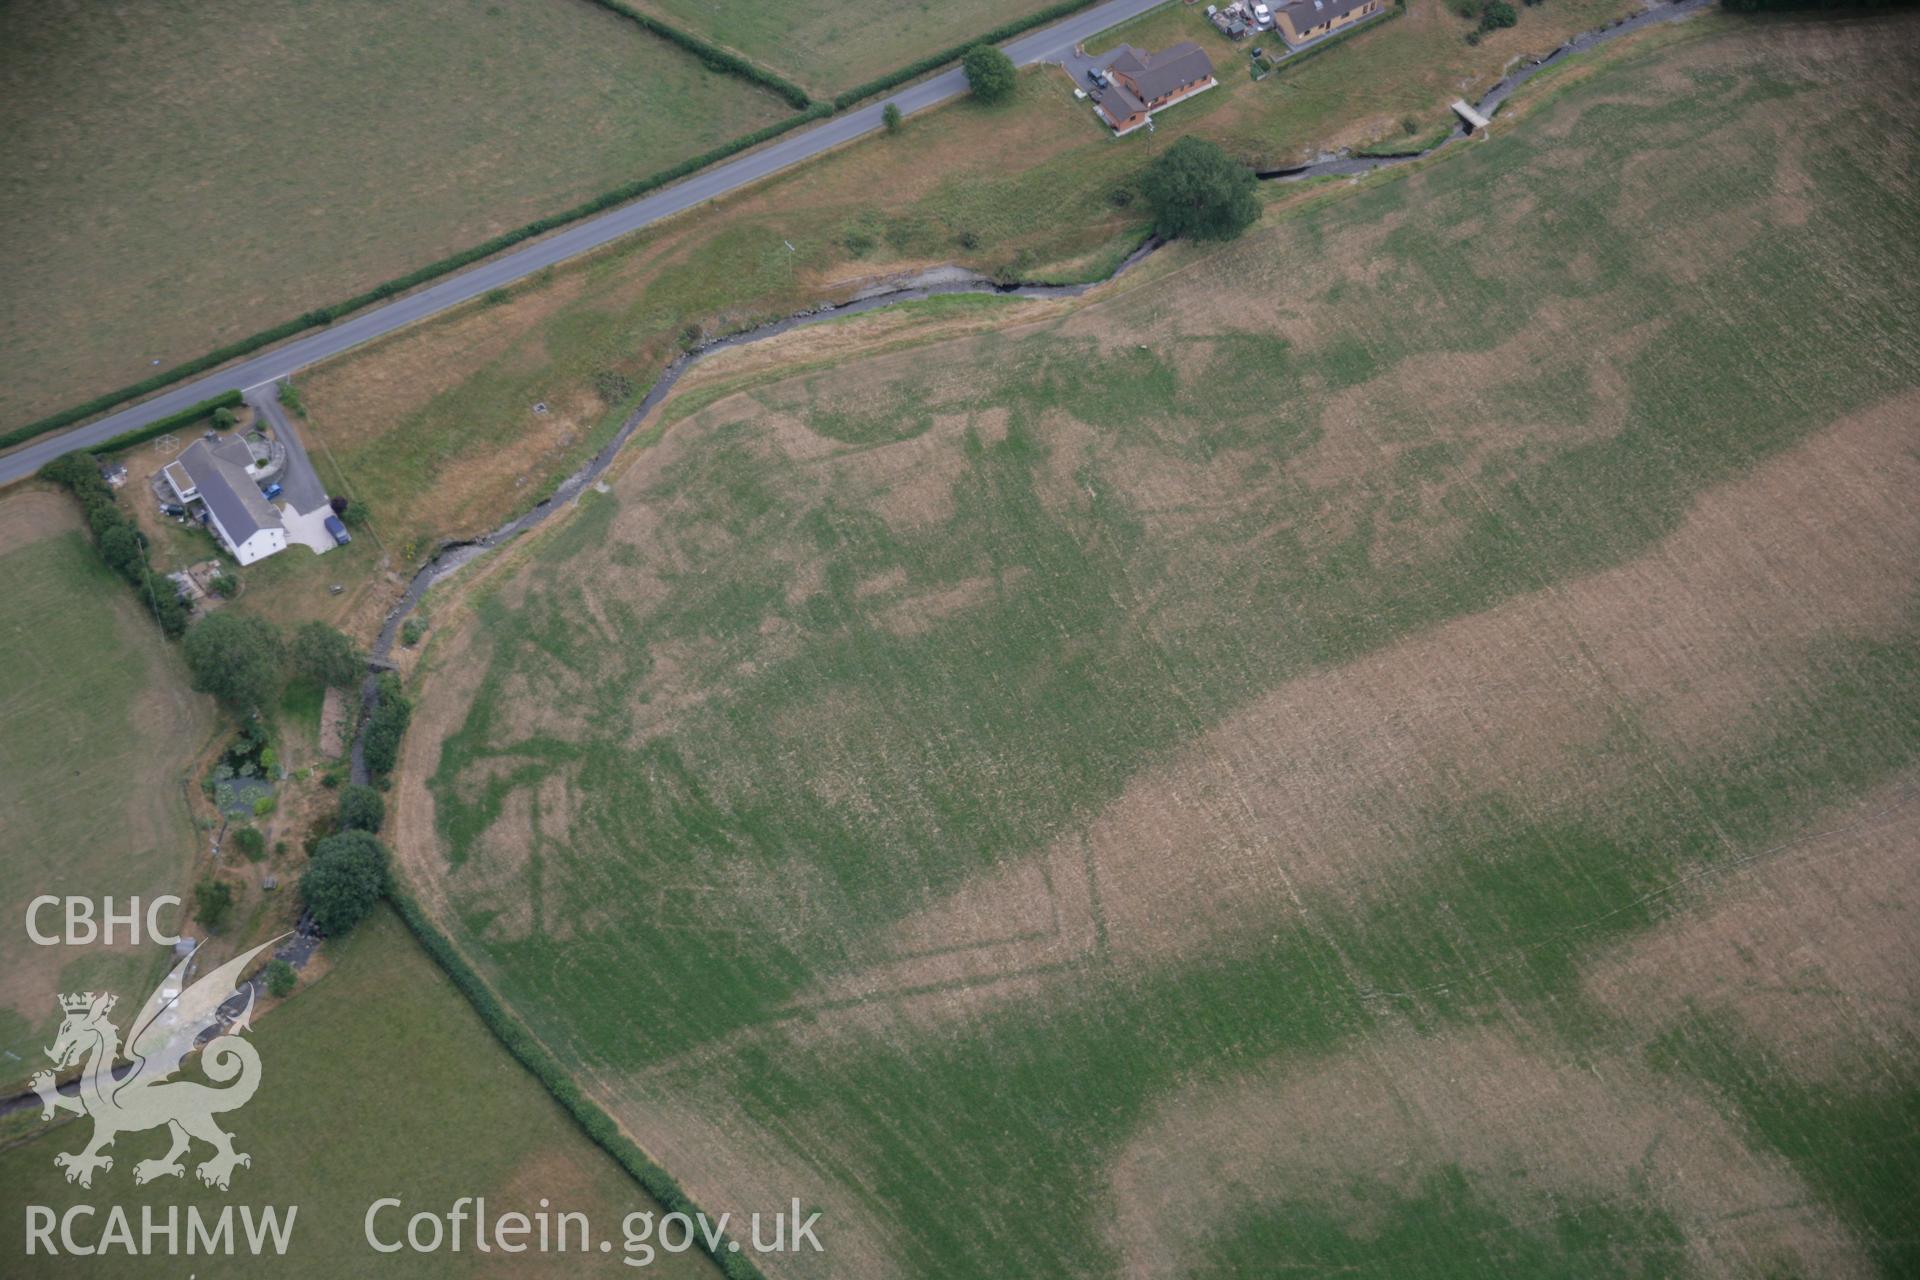 RCAHMW colour oblique aerial photograph of Nant Magwr Roman site, cropmarks from the north-east, by Toby Driver, 27/07/2006.